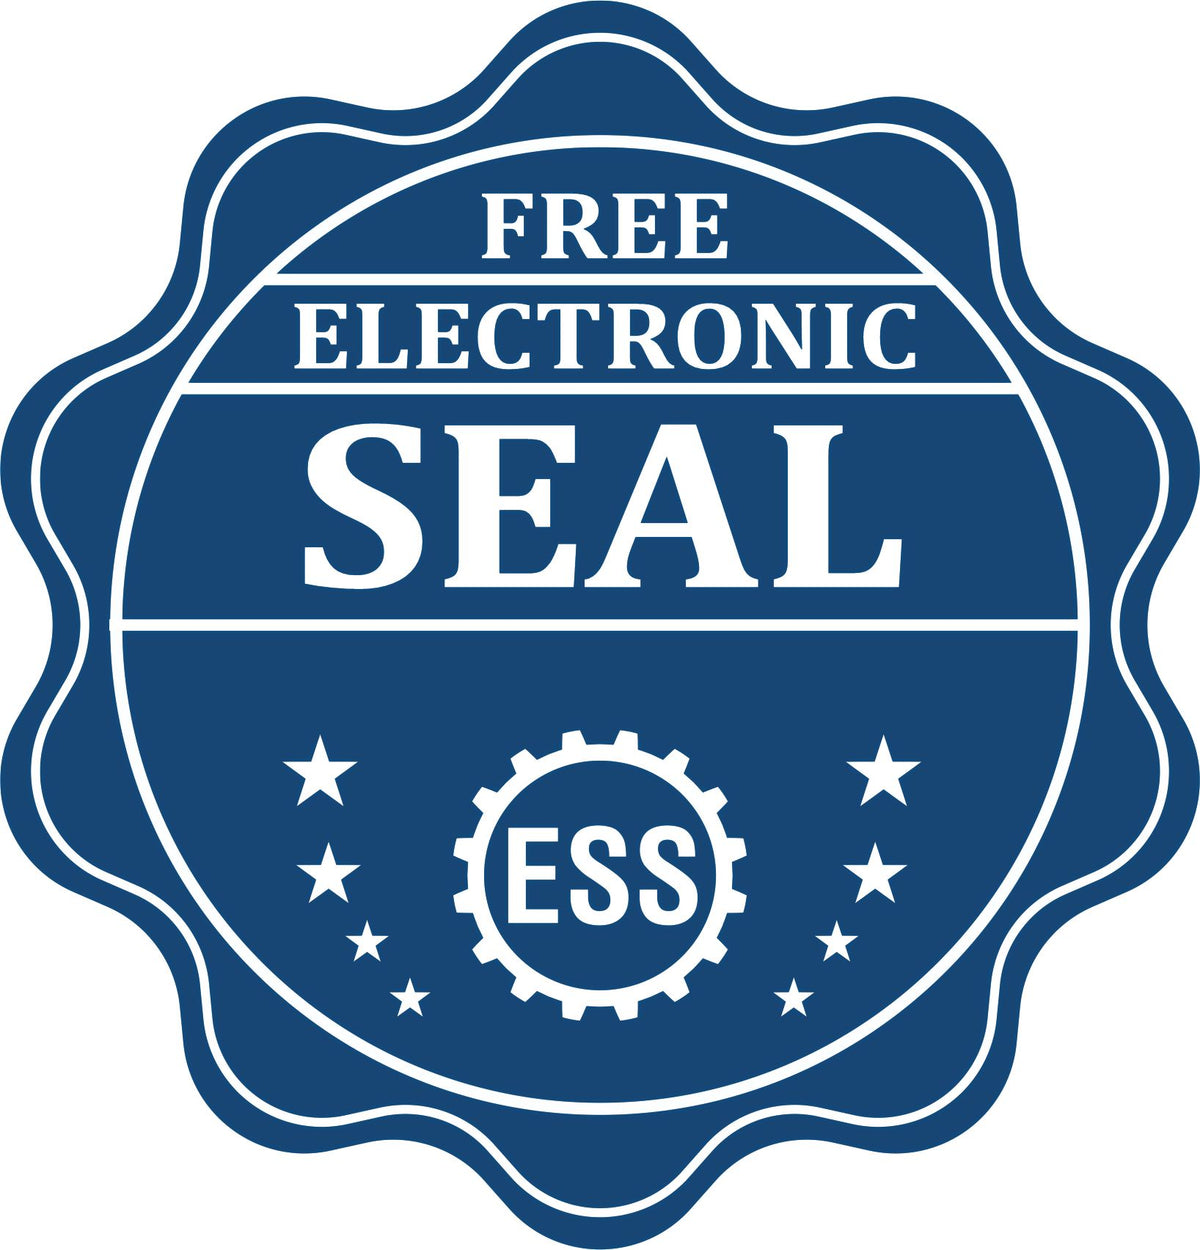 A badge showing a free electronic seal for the Long Reach Virginia PE Seal with stars and the ESS gear on the emblem.